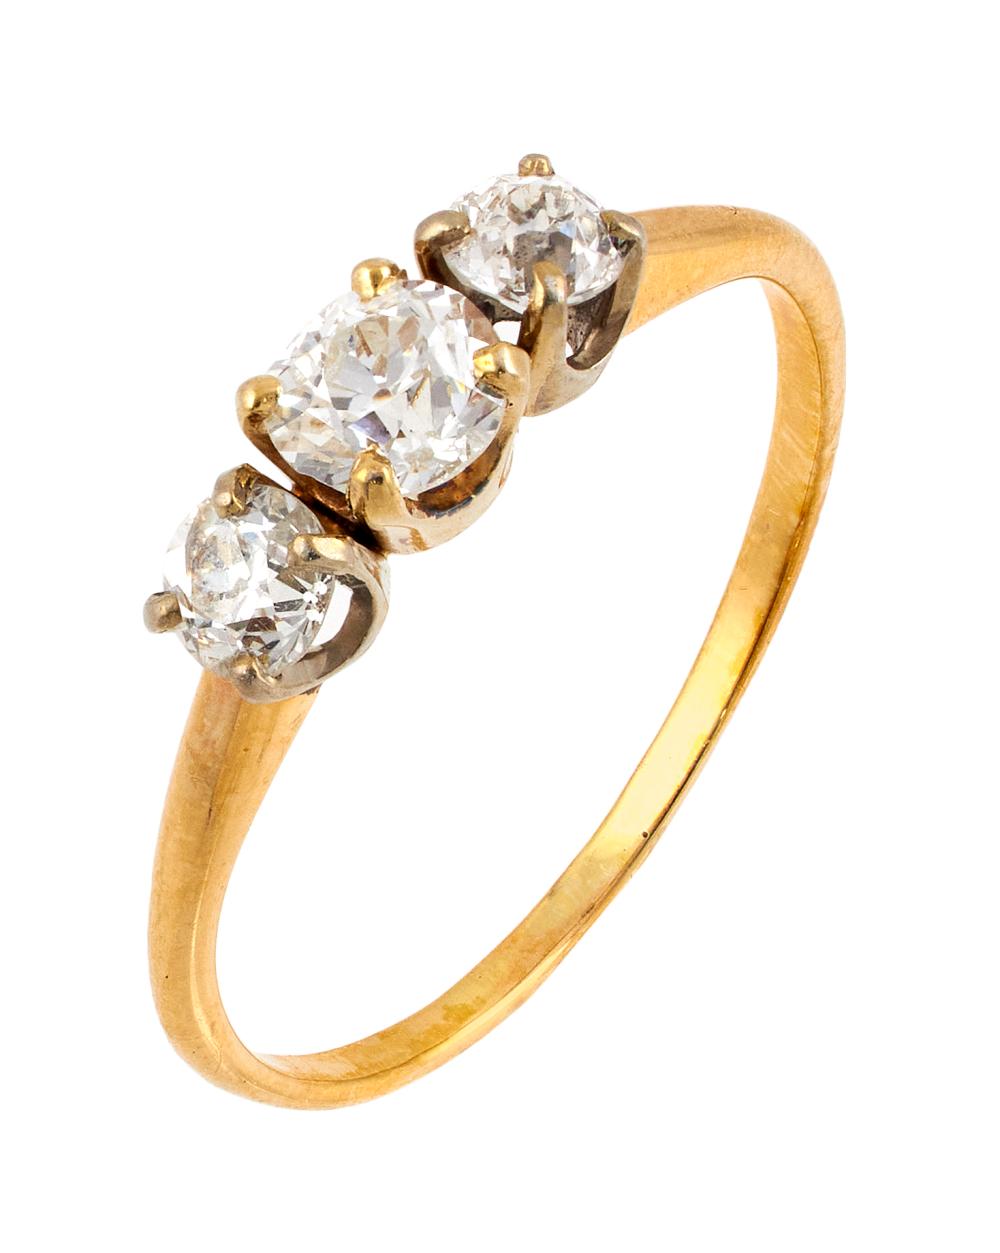 14KT YELLOW GOLD AND DIAMOND RING